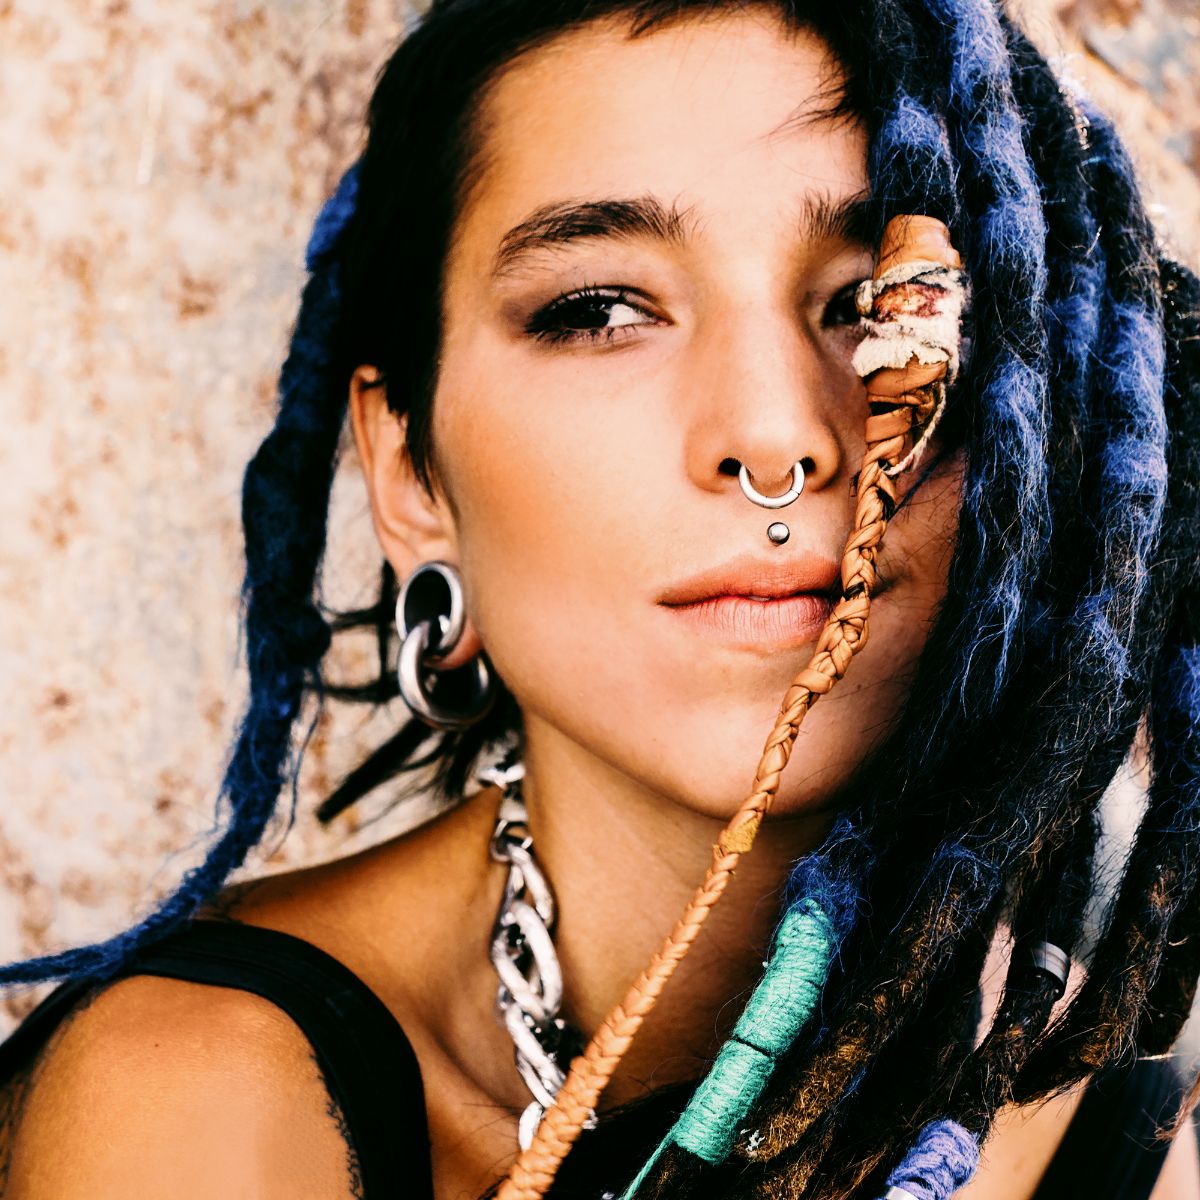 What is the spiritual meaning of dreadlock